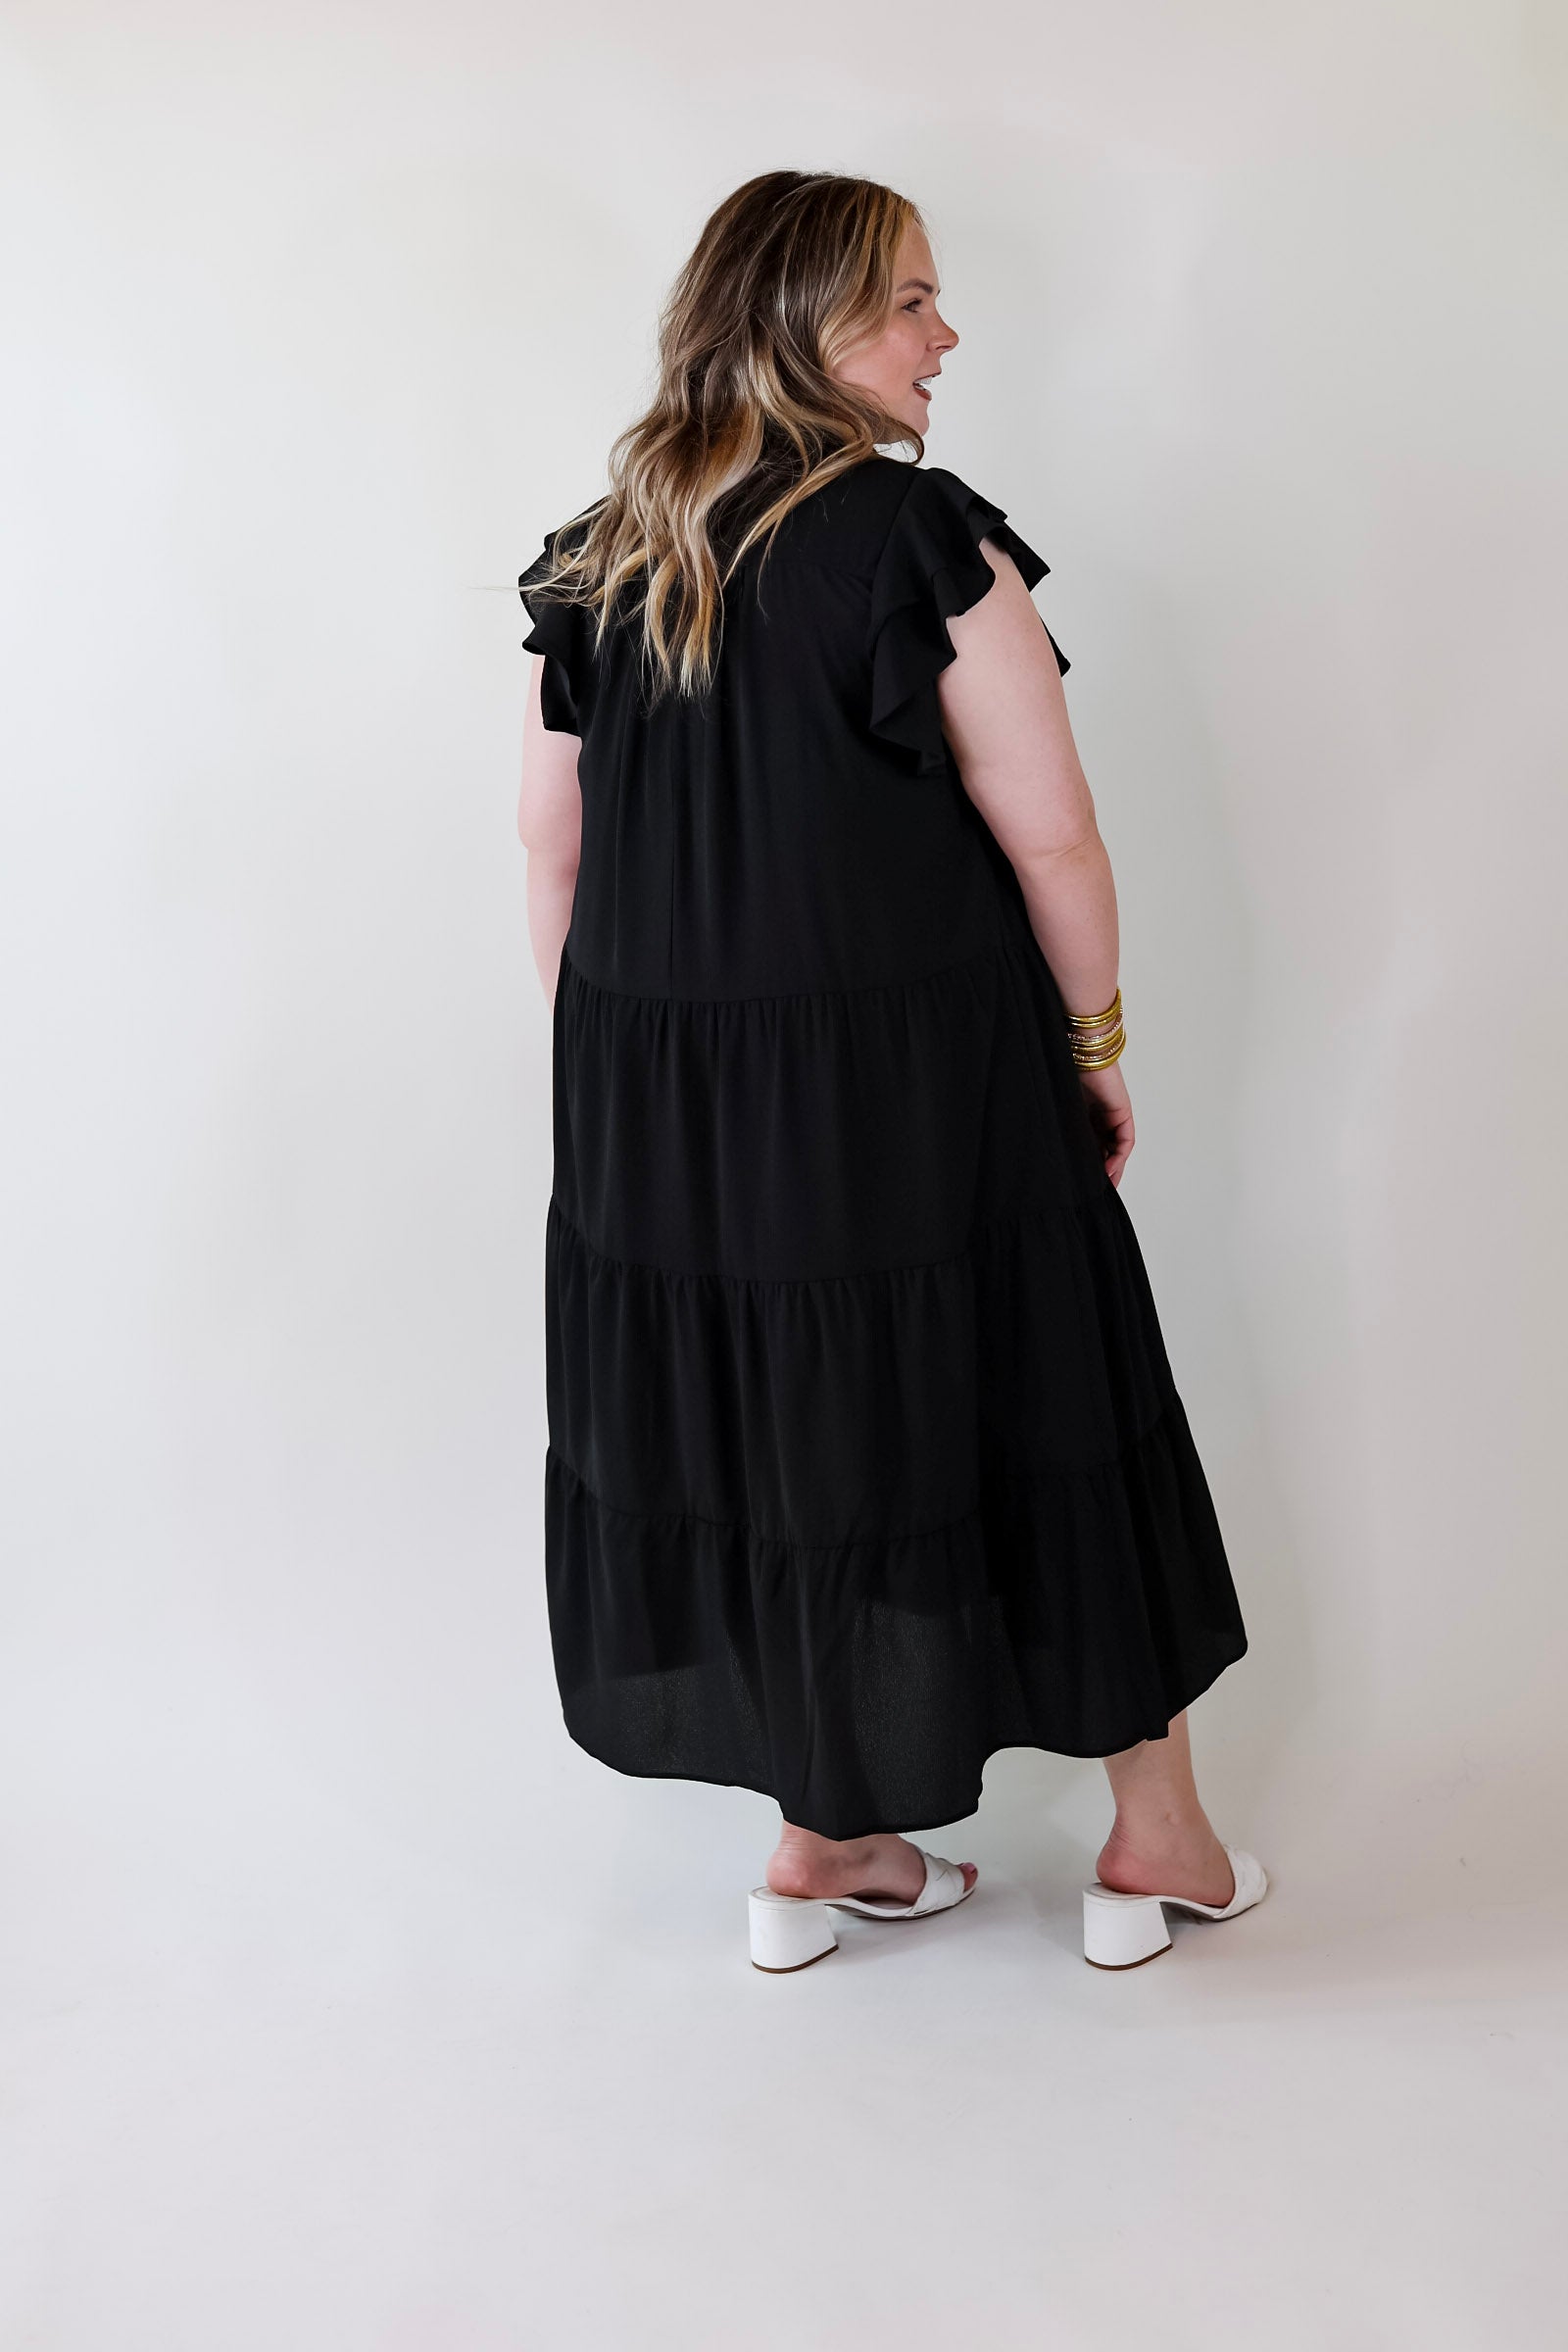 All Of A Sudden Tiered Midi Dress with Ruffle Cap Sleeves in Black - Giddy Up Glamour Boutique